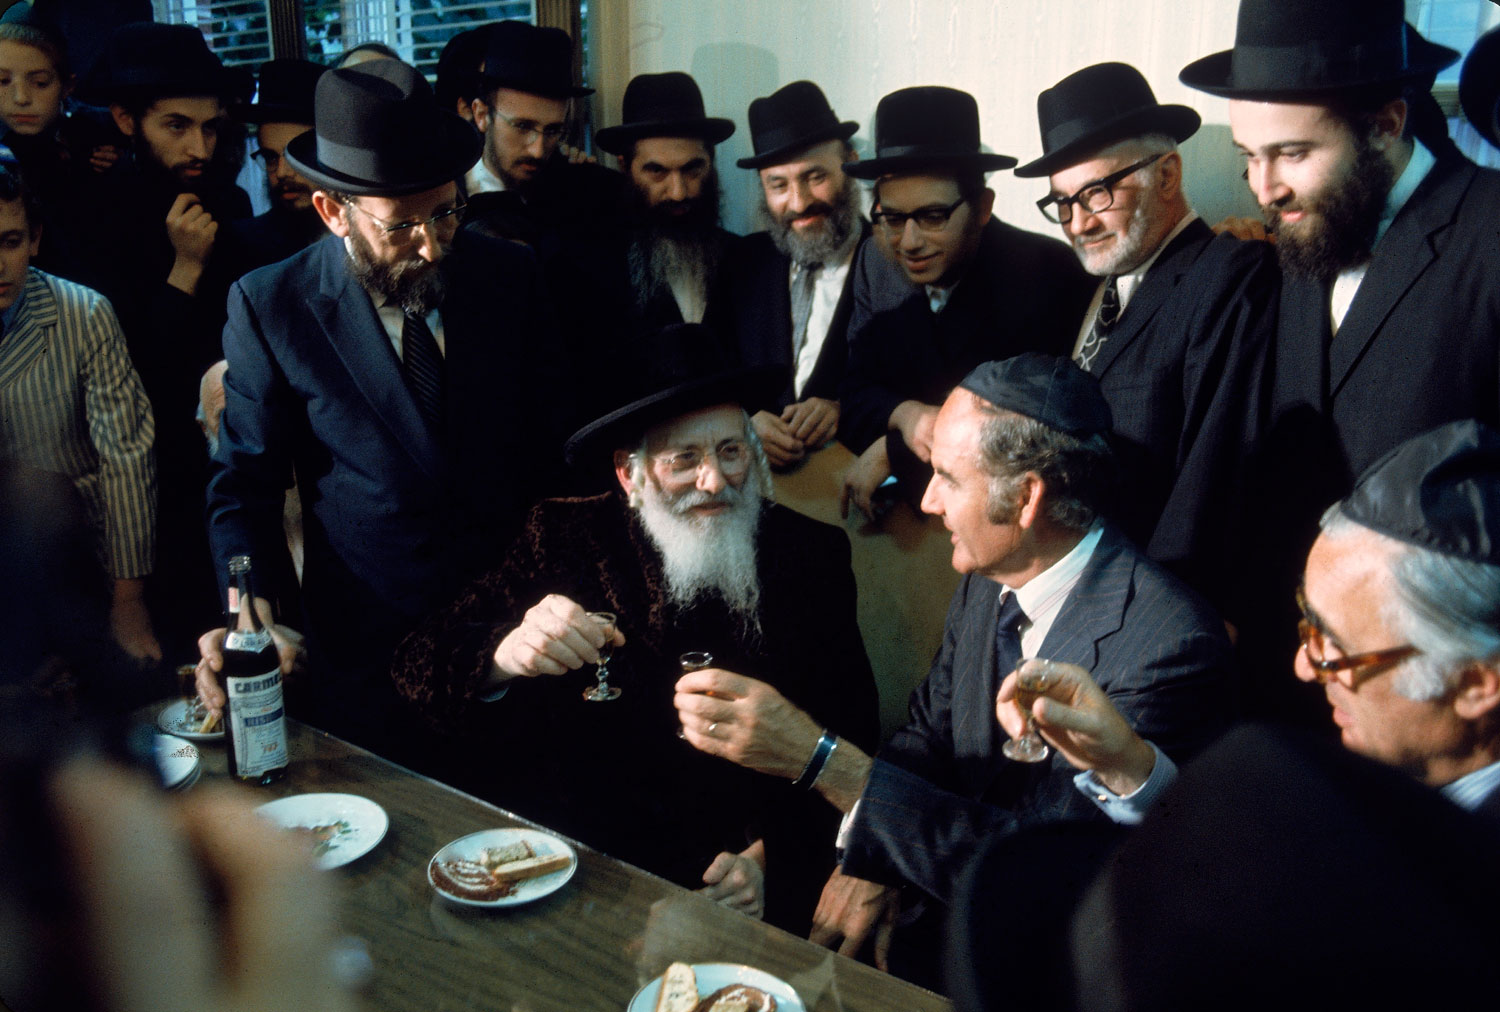 Democratic presidential candidate George McGovern shares a toast with Orthodox Jews while campaigning in California in 1972.